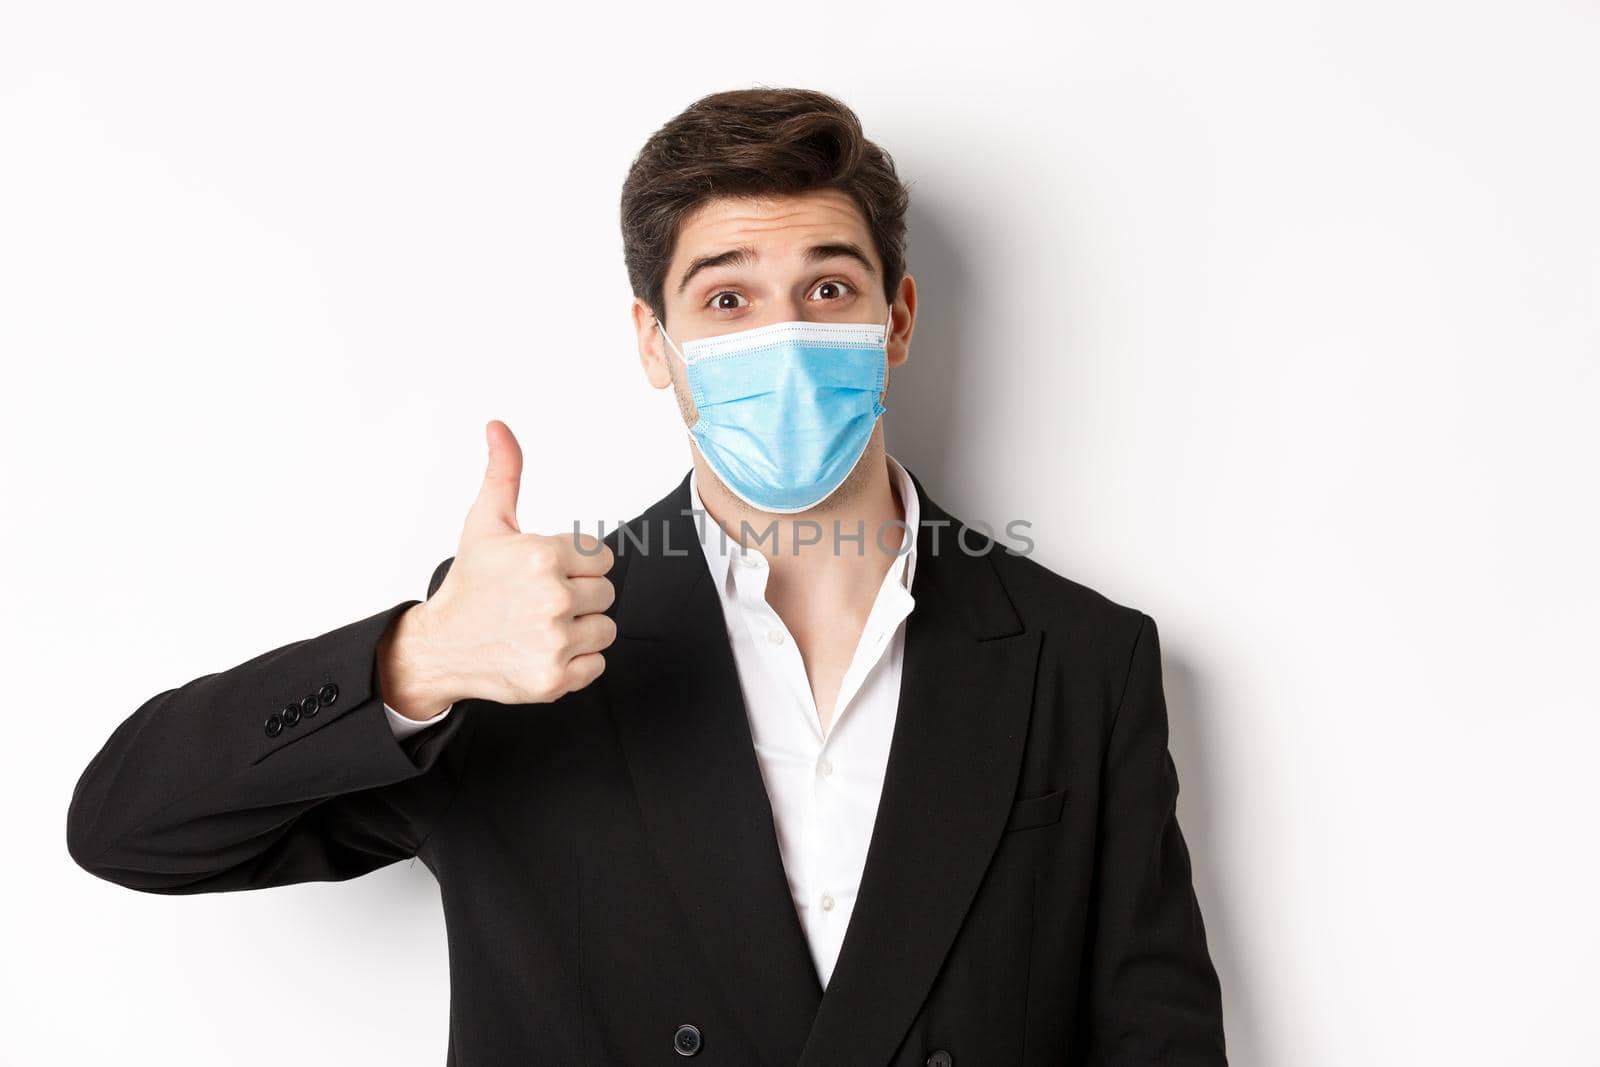 Concept of covid-19, business and social distancing. Close-up of happy businessman in black suit and medical mask, showing thumbs-up, making a compliment, white background.